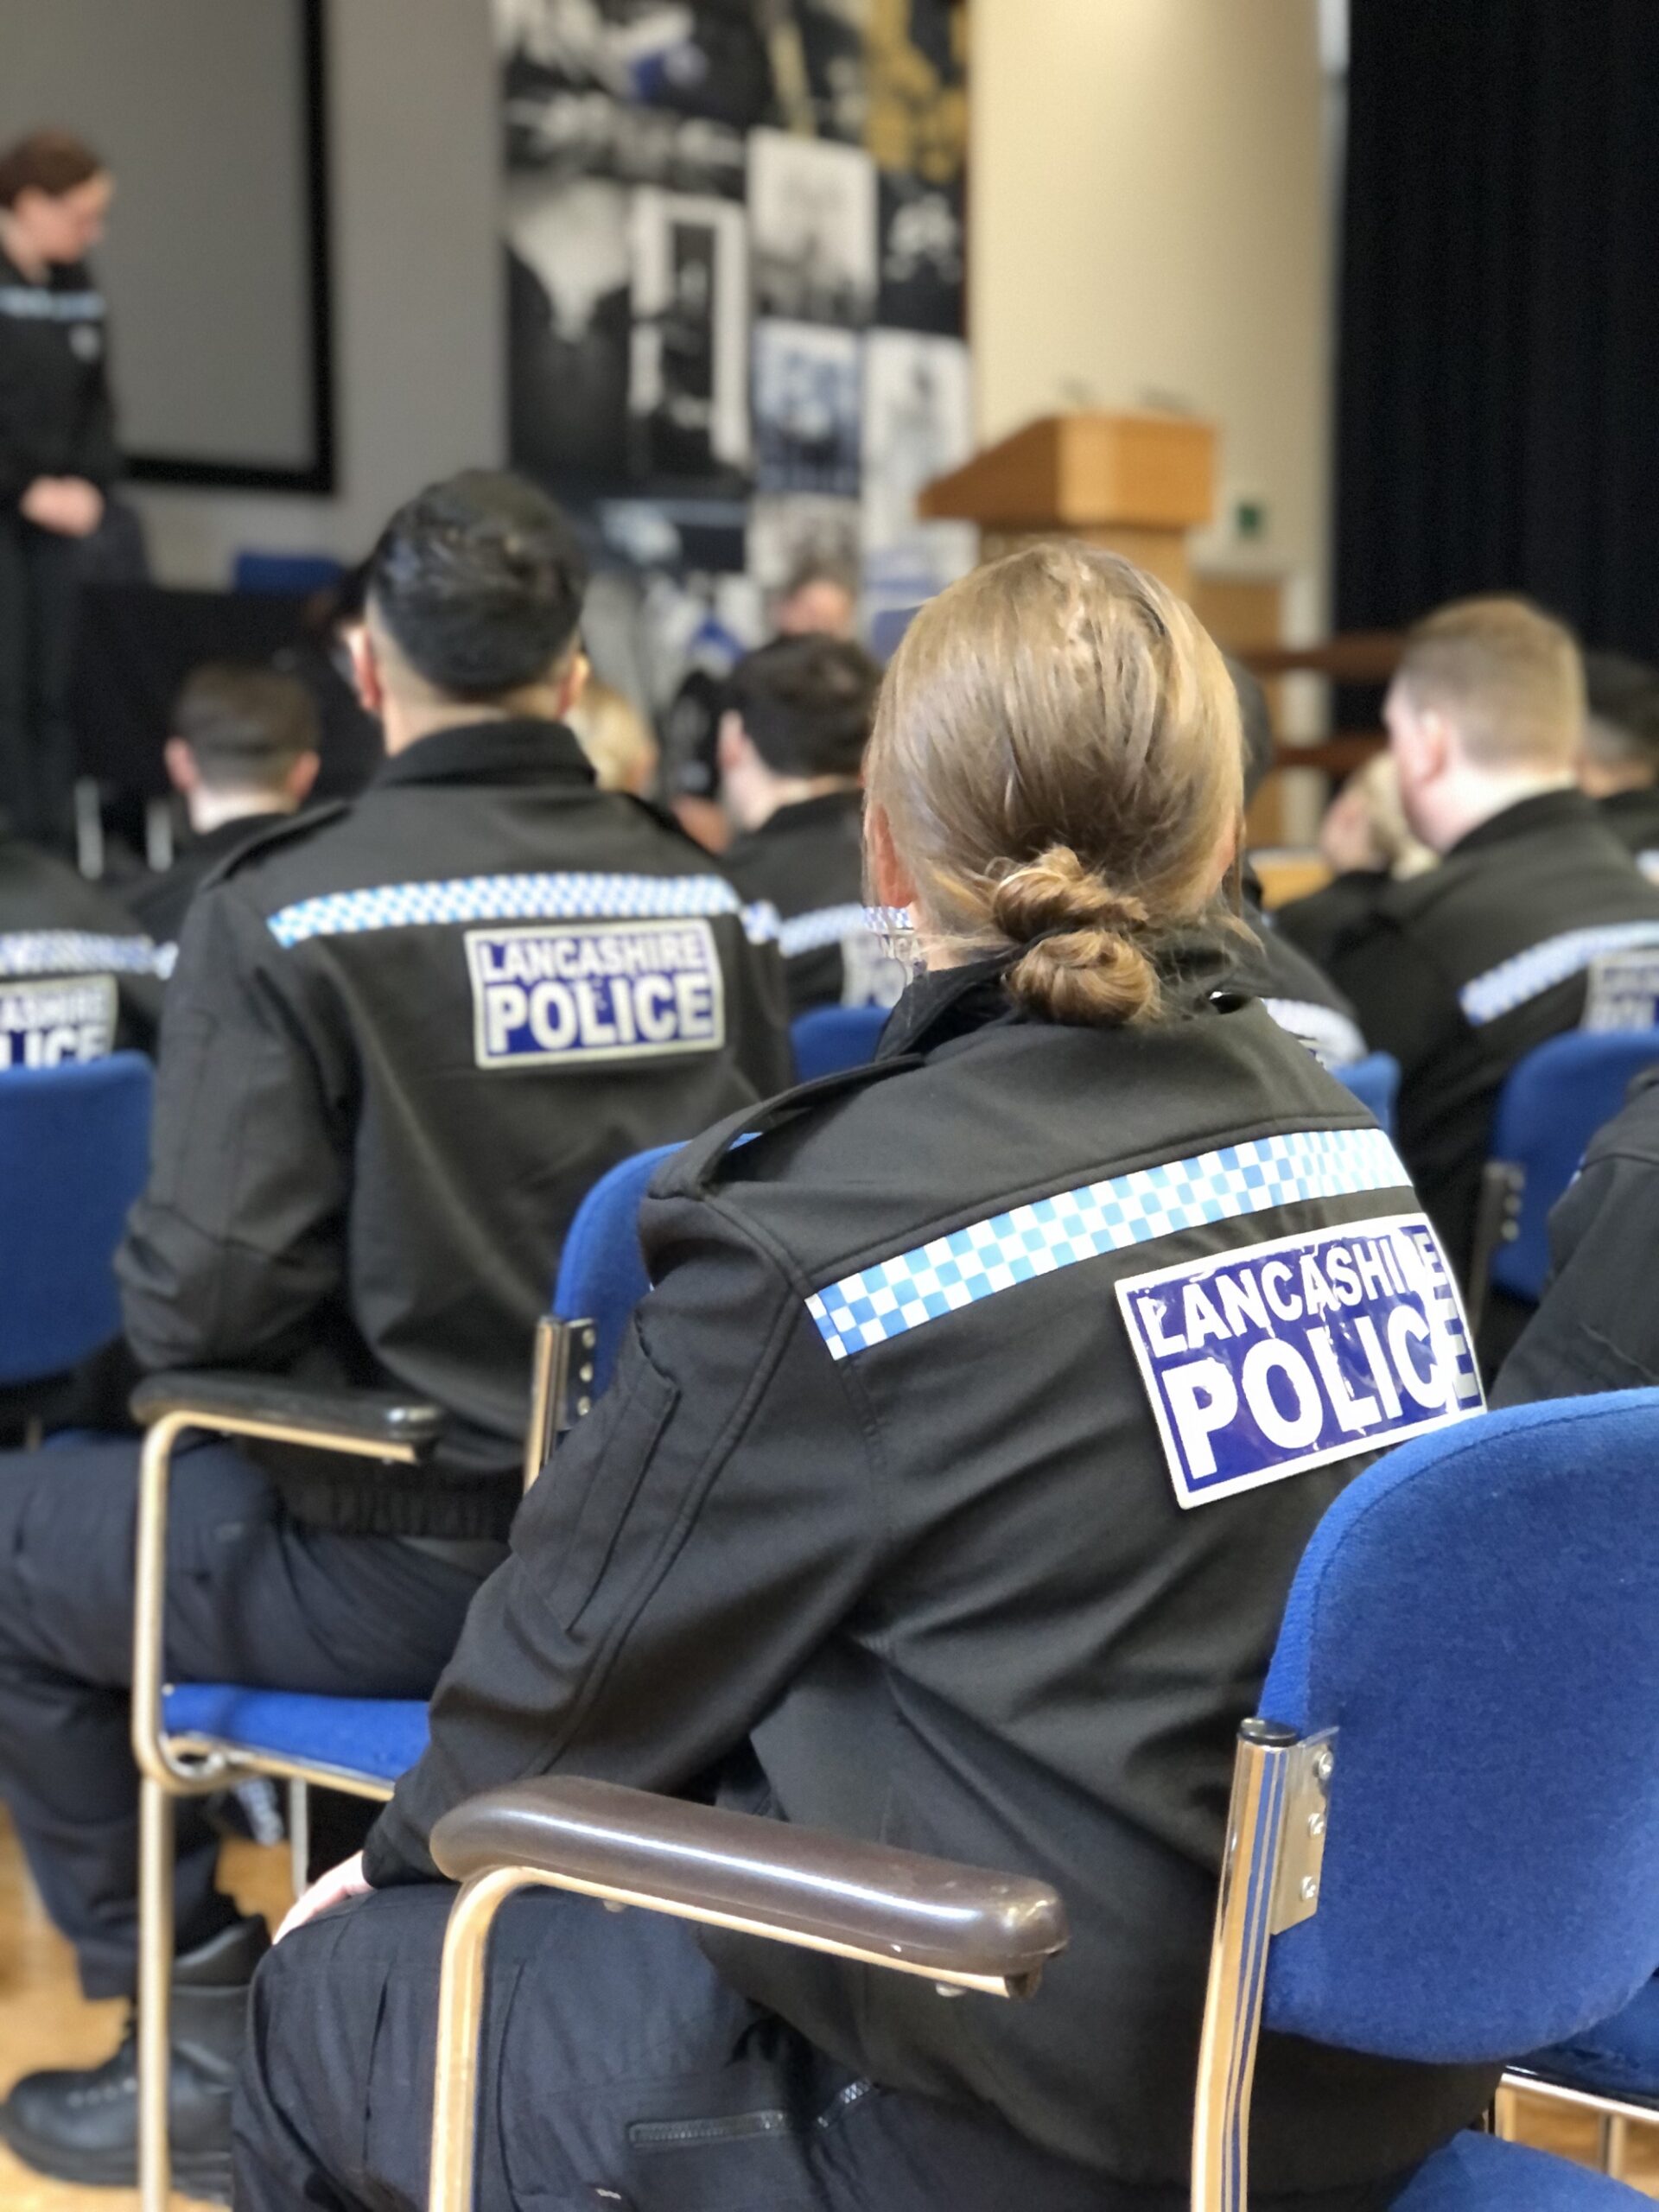 50 new Officers hit the beat in Lancashire!